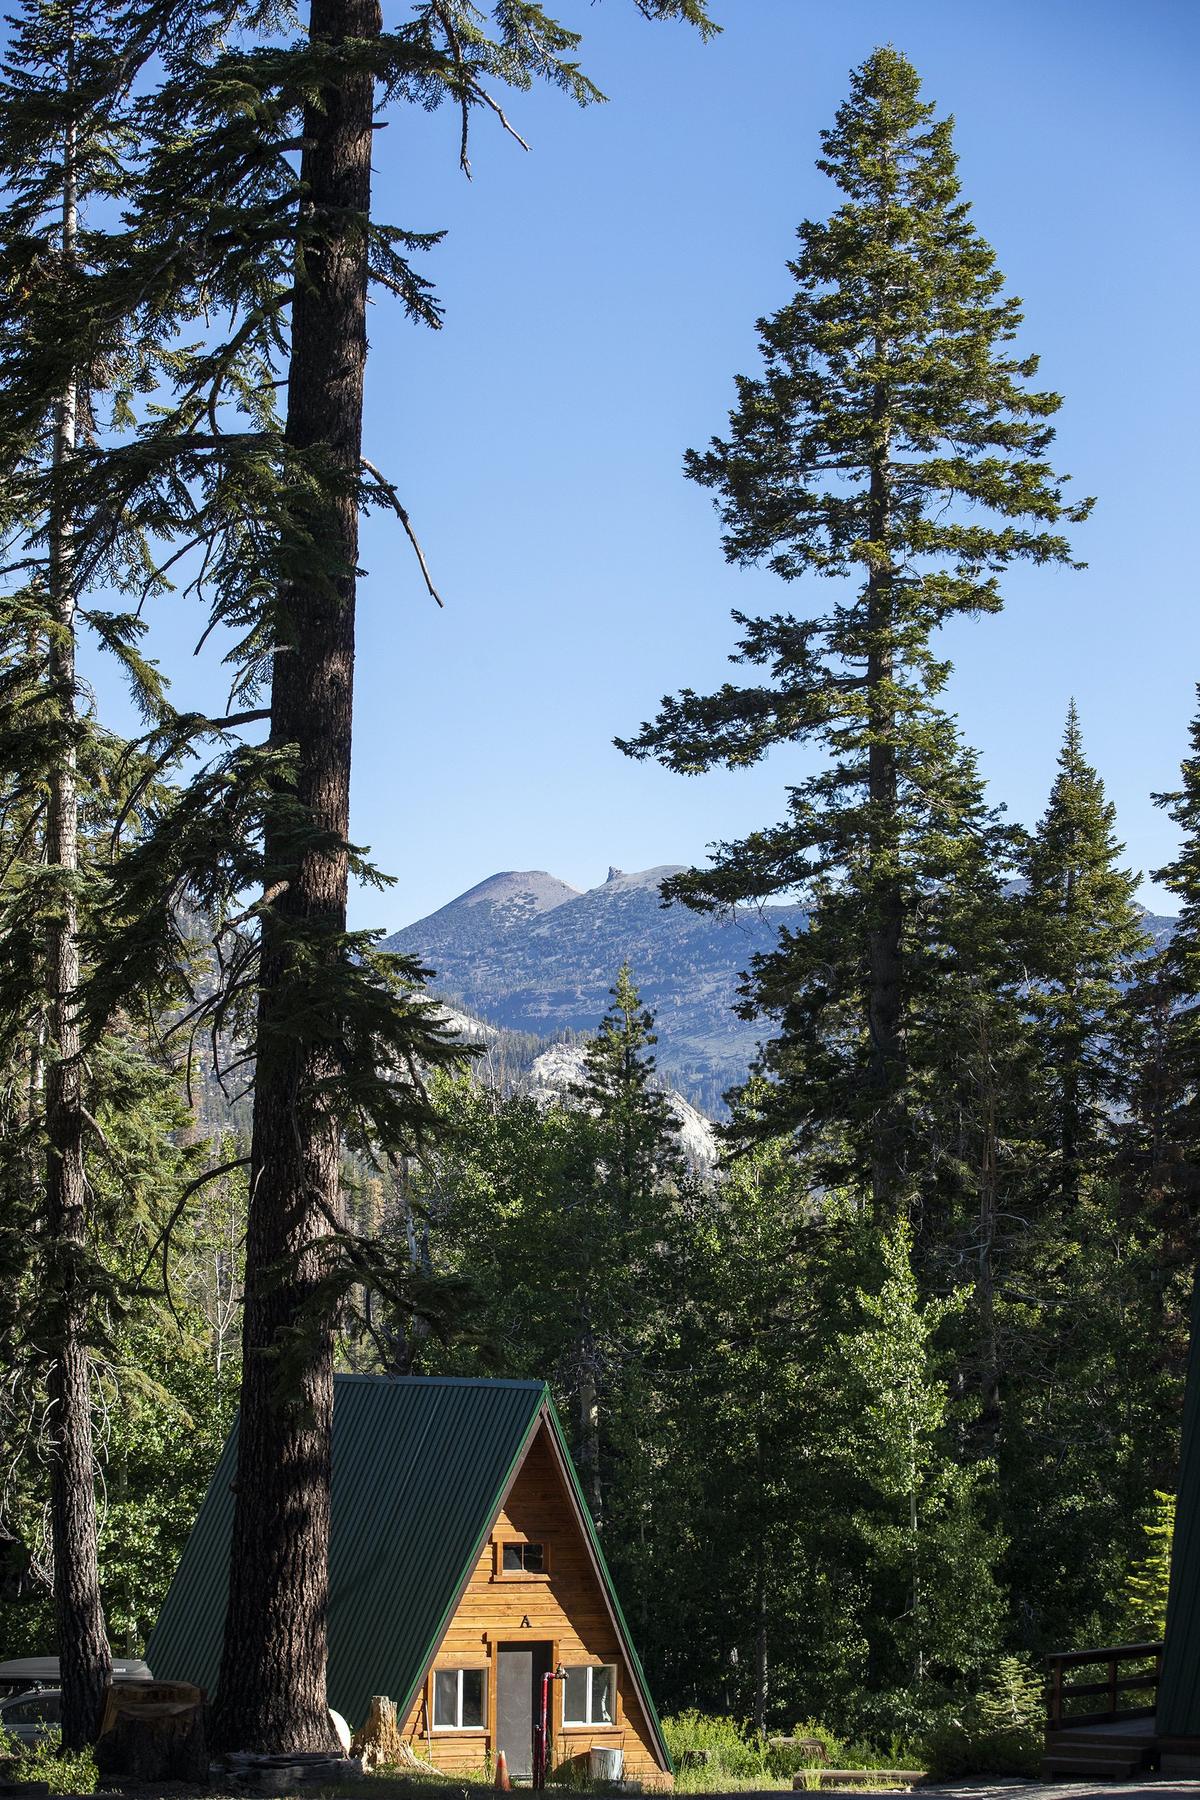 A view of a cabin at Red's Meadow Resort & Pack Station, located at an elevation of 7,500 feet on June 21, 2022, in Mammoth Lakes, California. (Allen J. Schaben/Los Angeles Times/TNS)